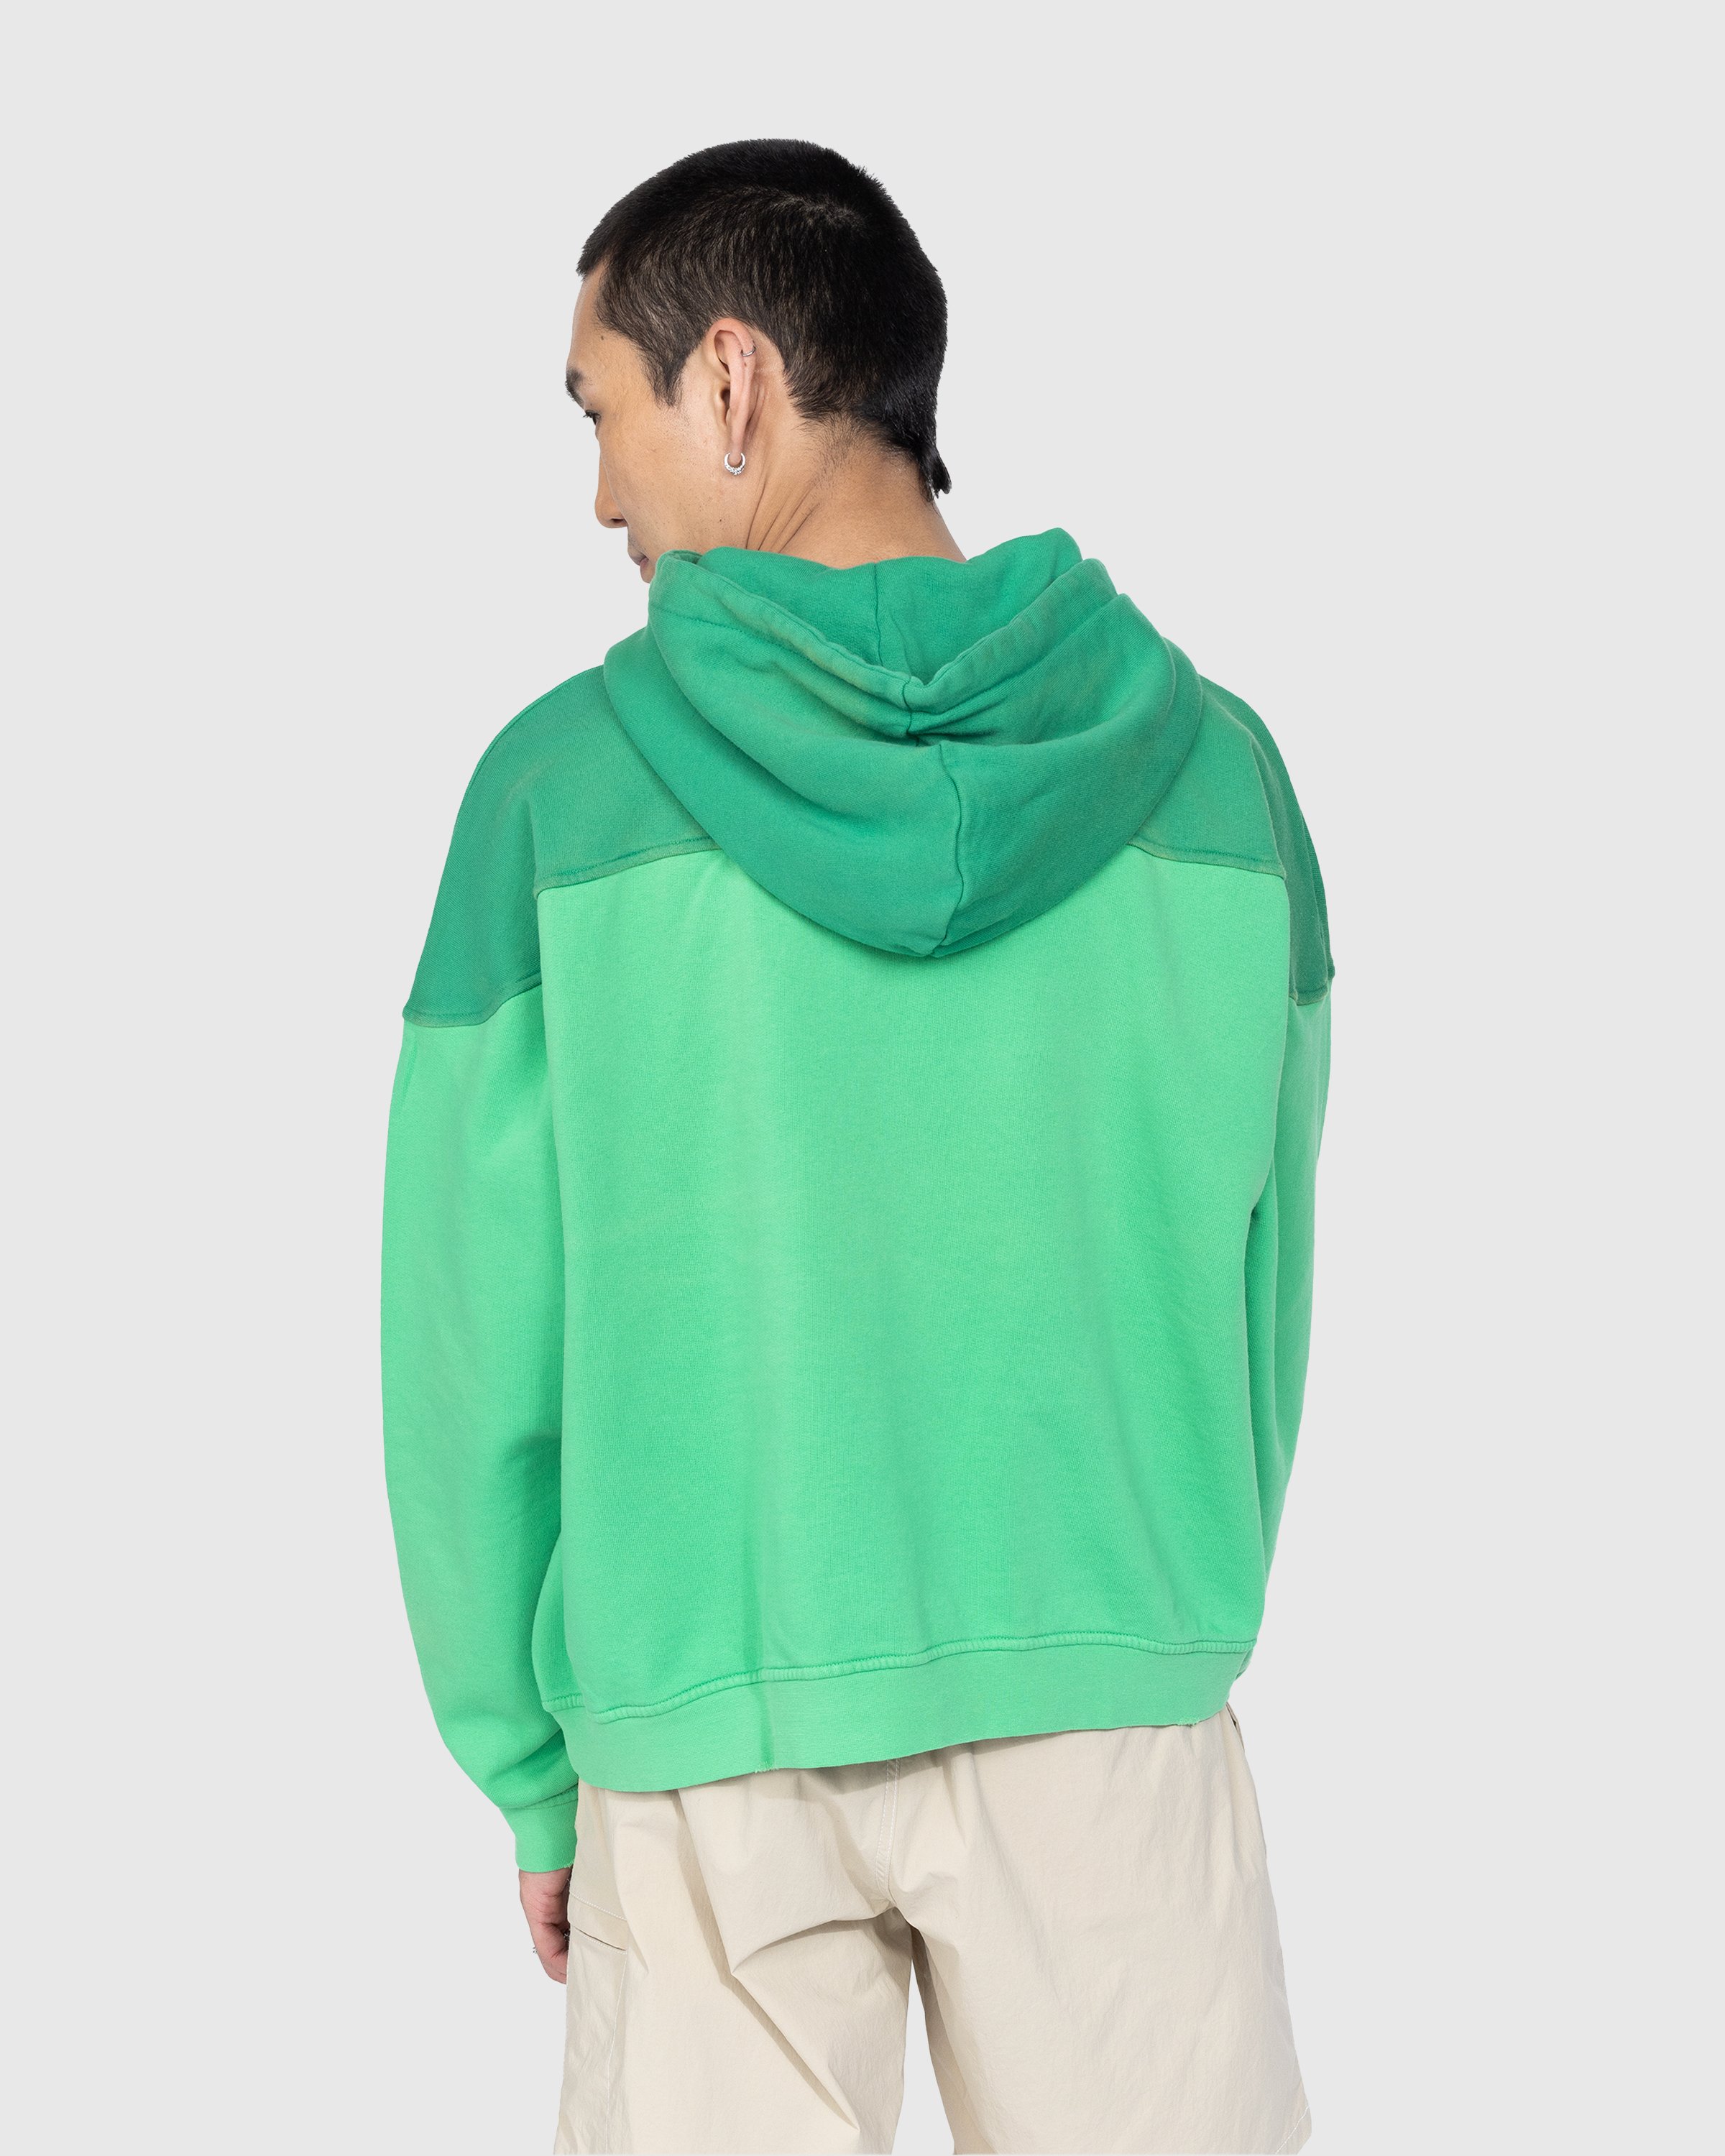 Guess USA - Two-Tone Hoodie Honeydew - Clothing - Green - Image 3